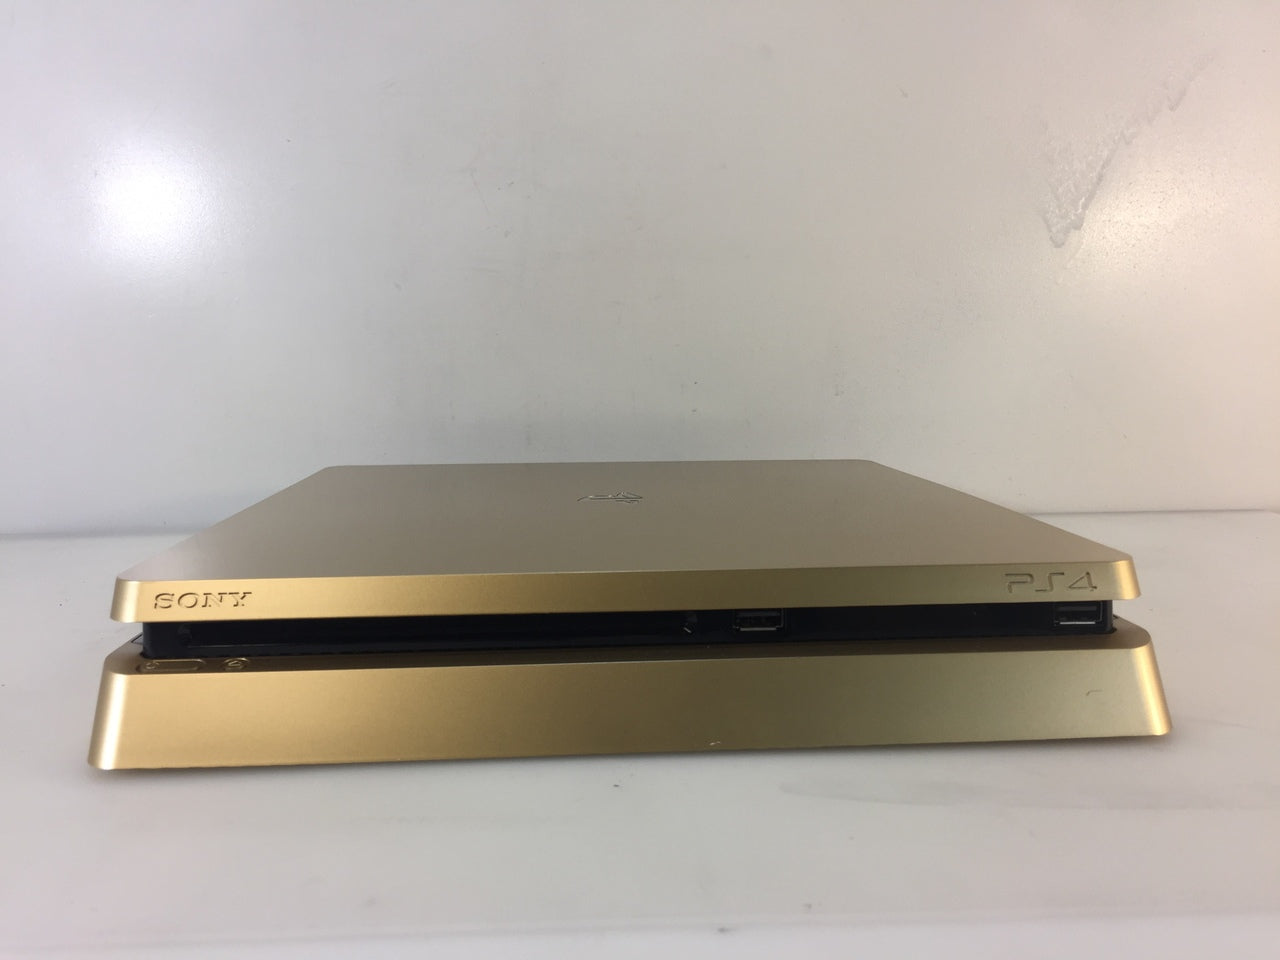 SONY PlayStation 4 Slim 1TB Gold Console - (PS4) Playstation 4